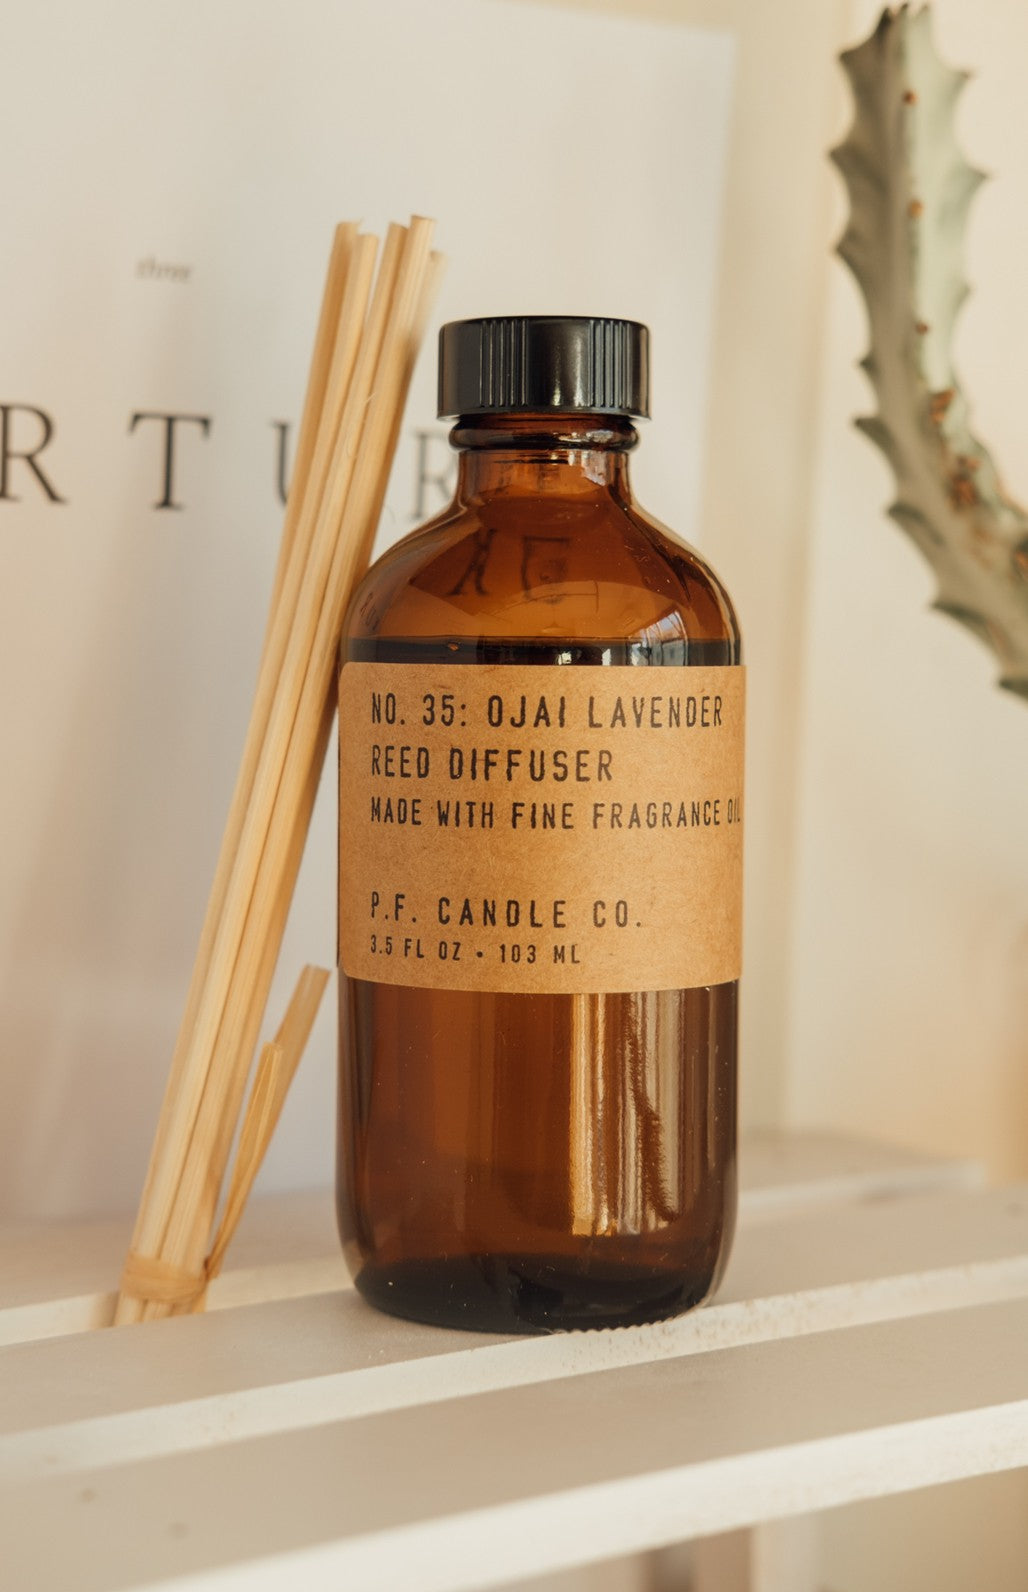 P.F.Candle Co. / Reed Diffuser